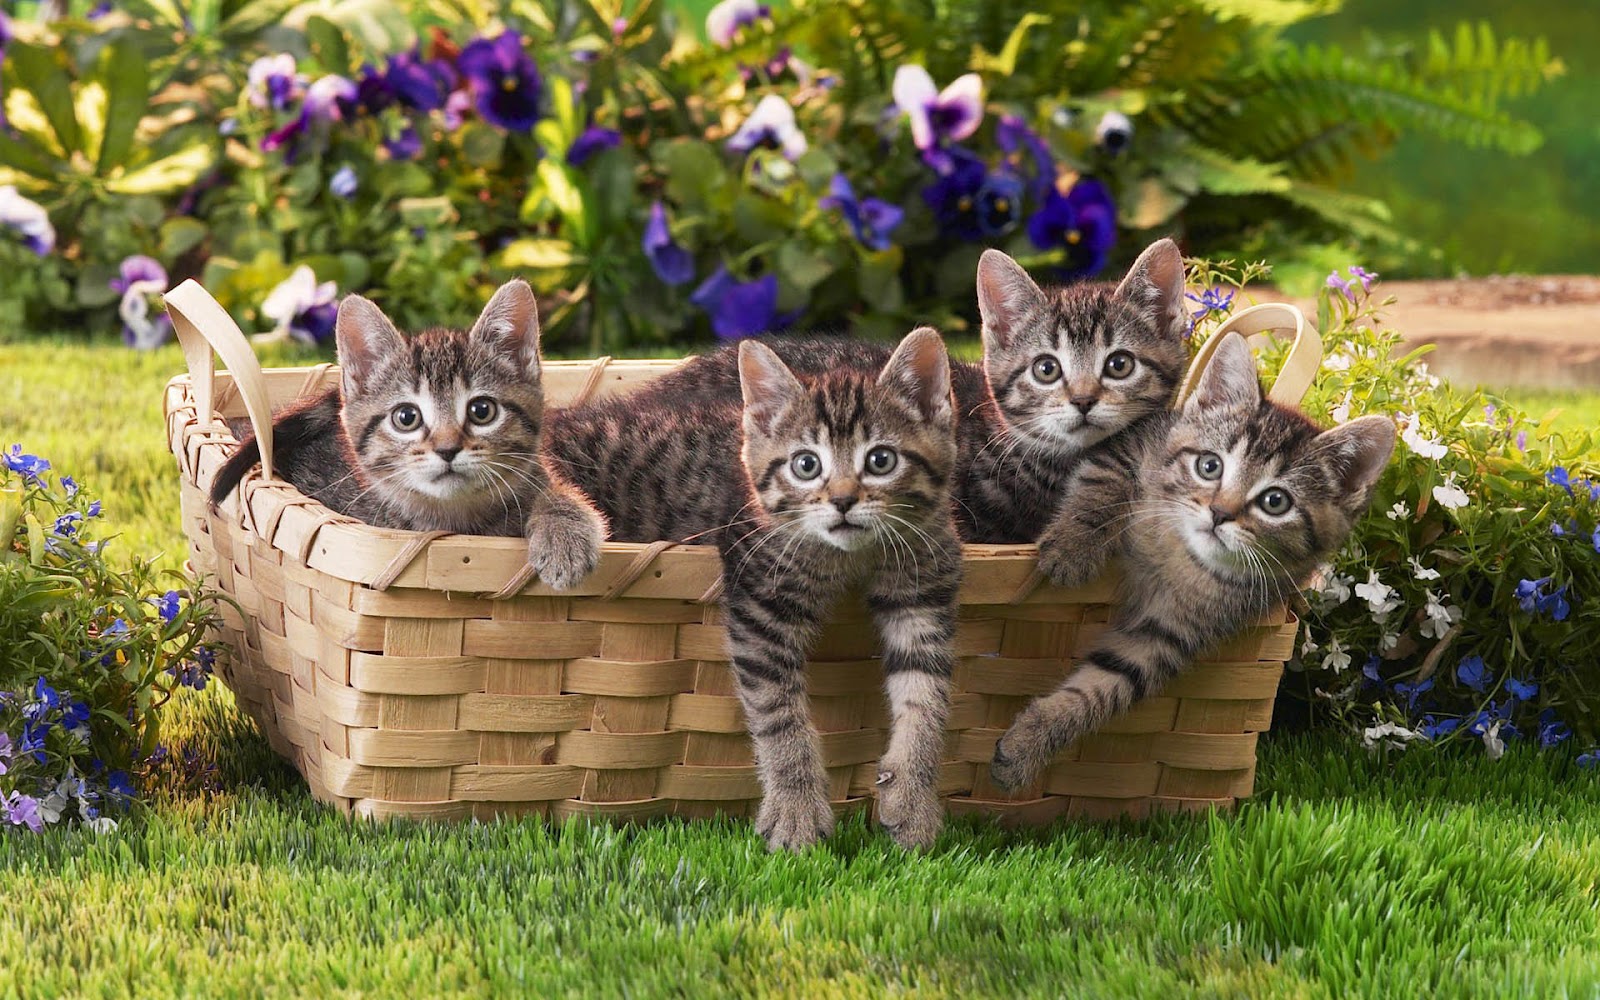 Funny Photo With Cute Little Cats In A Basket - New Photos Free Download - HD Wallpaper 